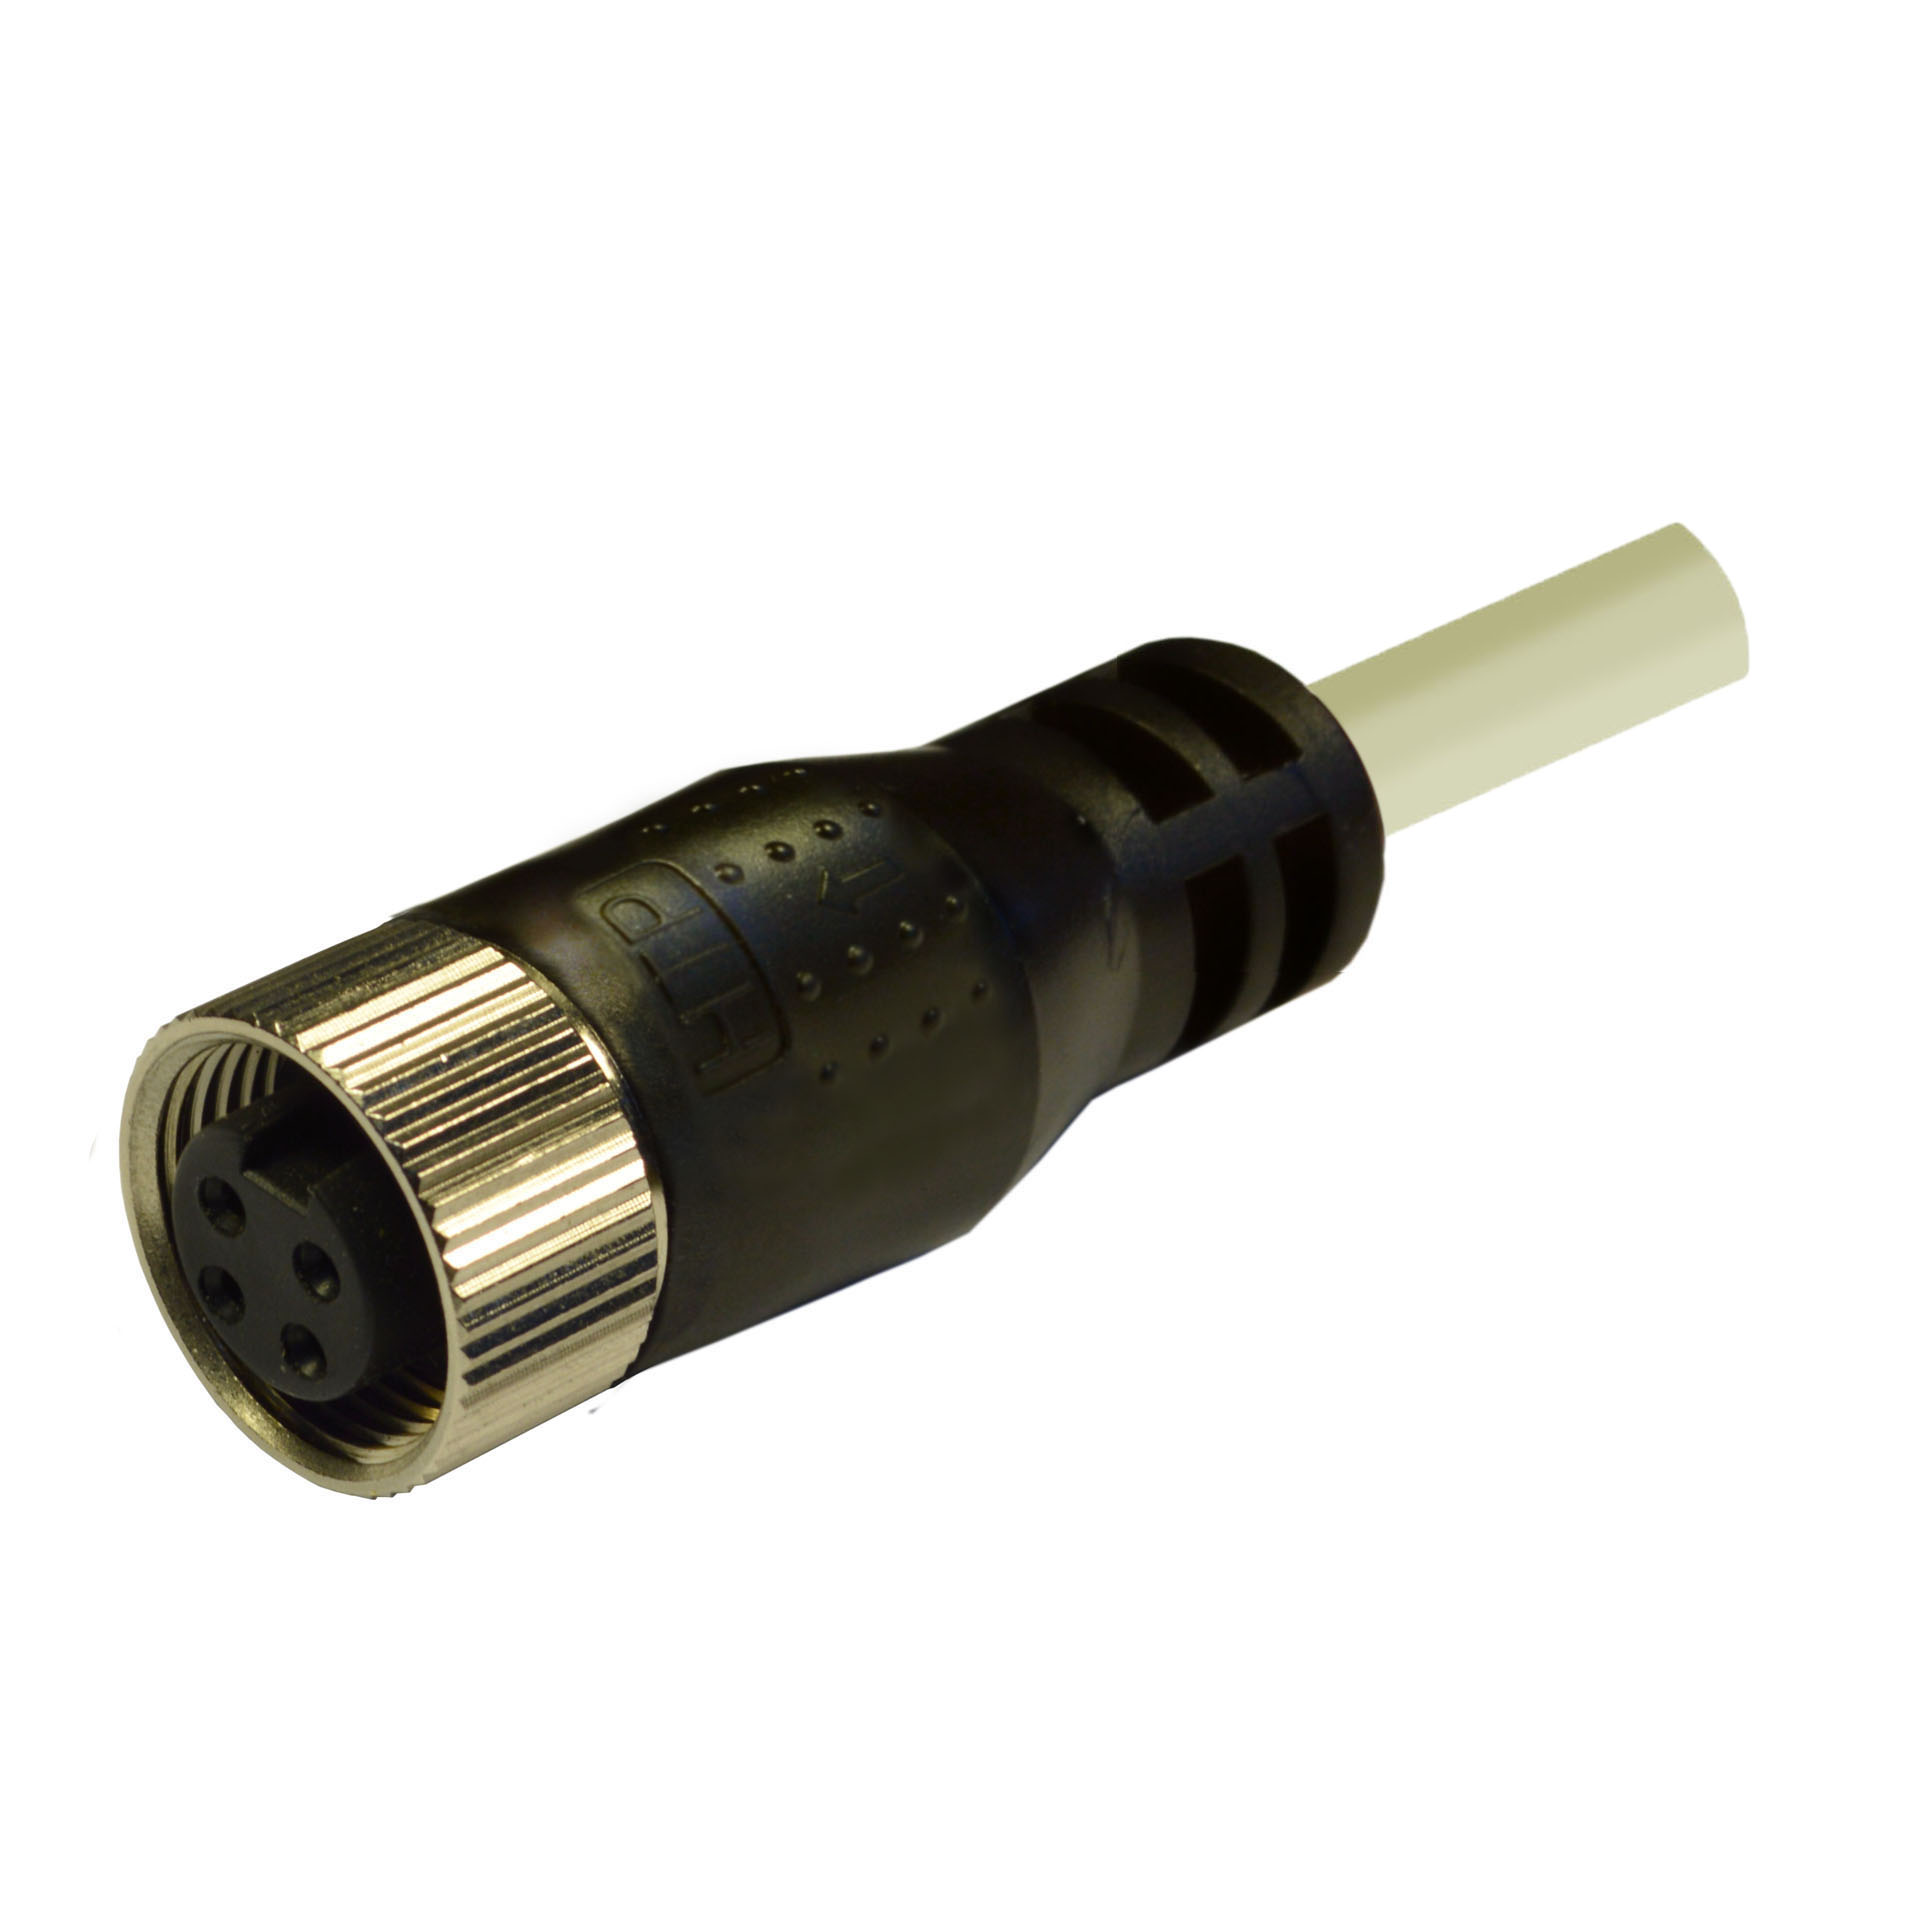 7/8 connector, female, 180°, with 3.5m of cable 4x1.5 shielded, colour grey